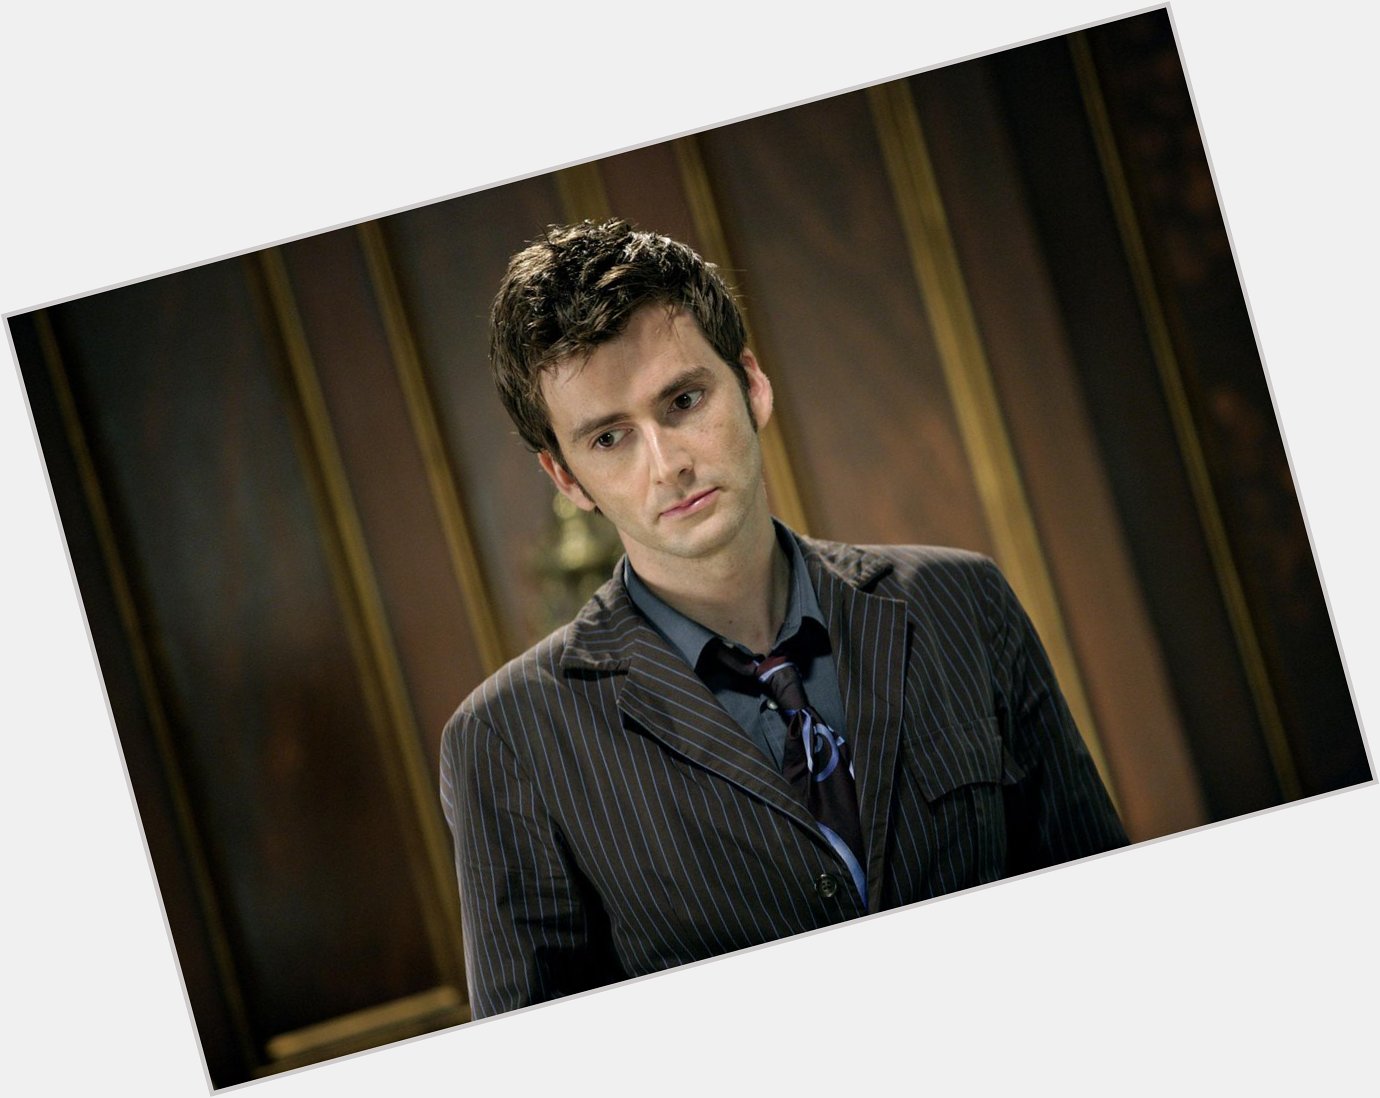 Happy Birthday, David Tennant! The actor is 44 today. Have a good one! 